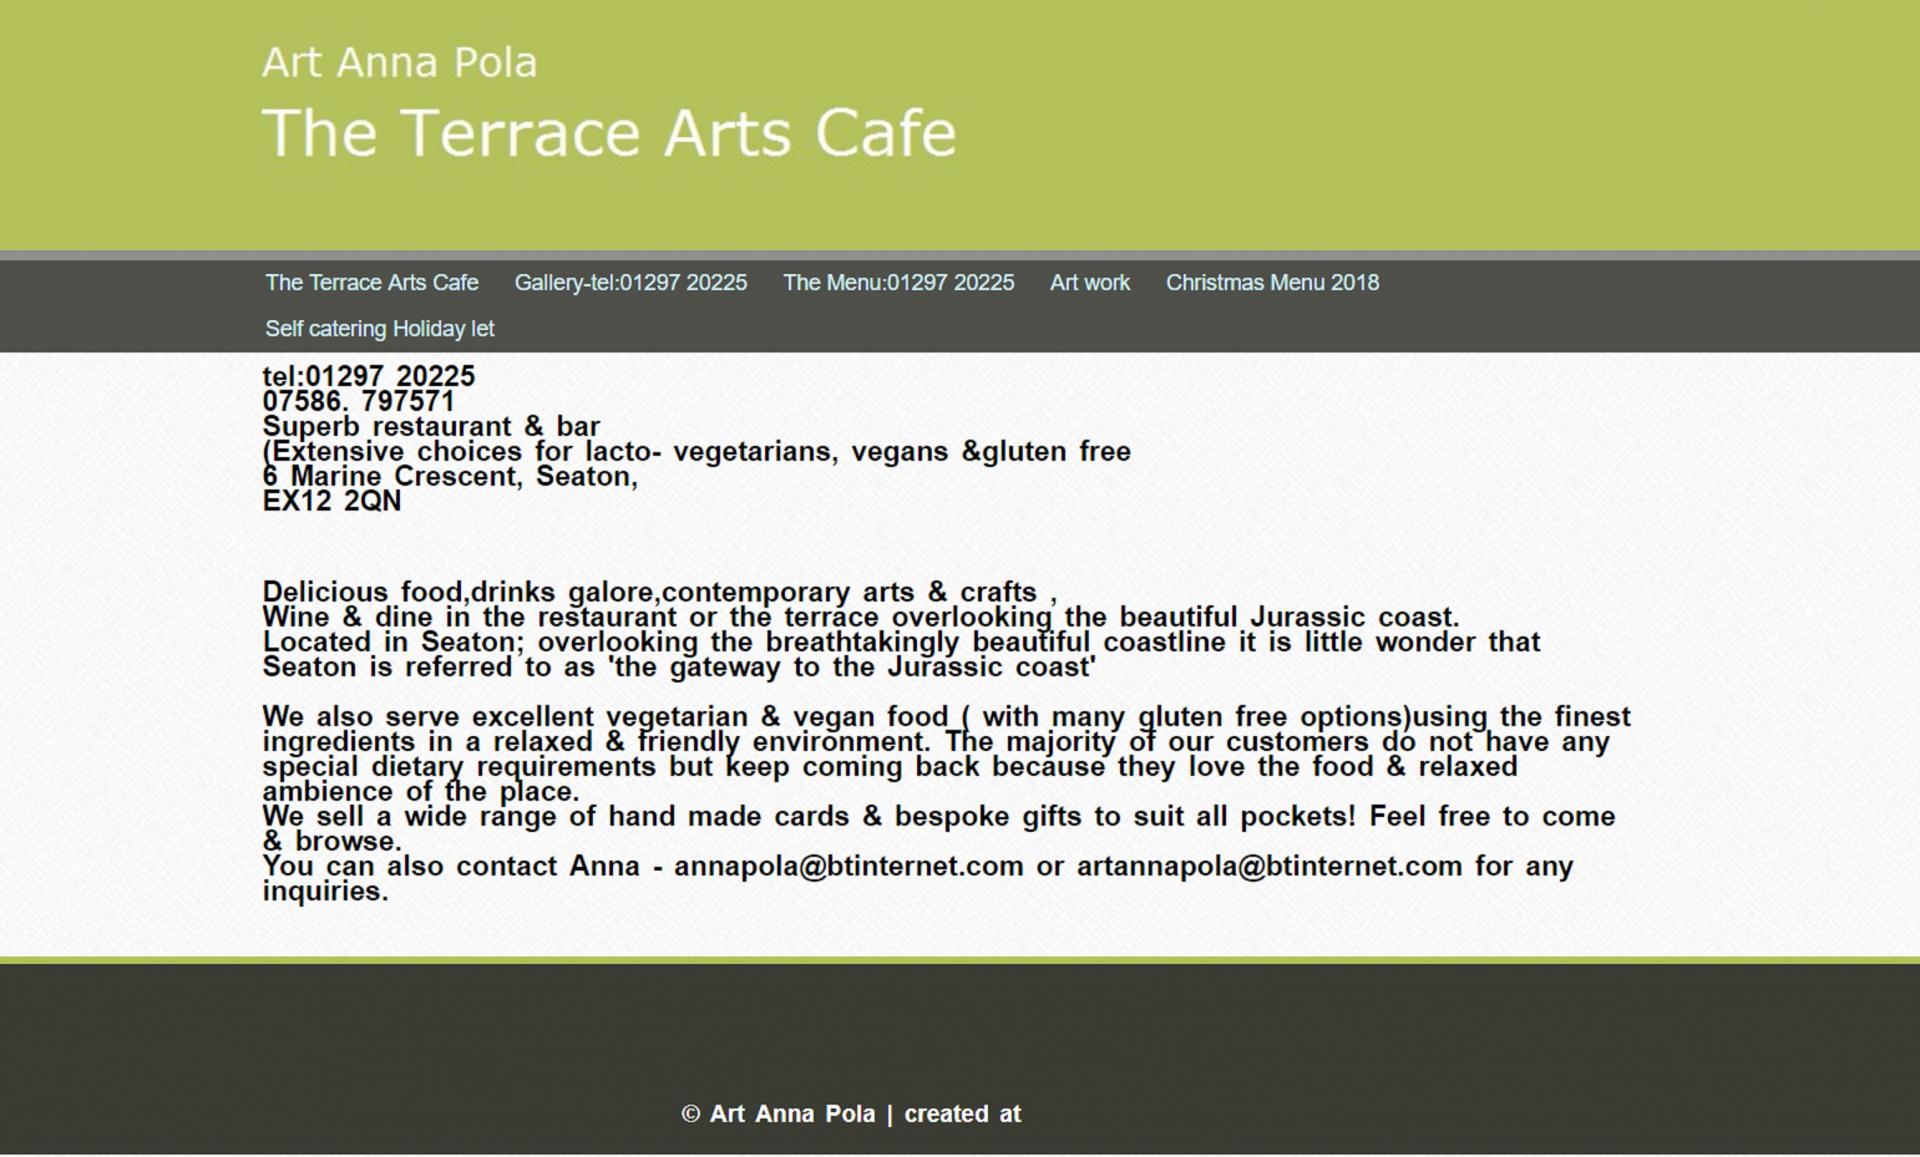 The Terrace Arts Cafe